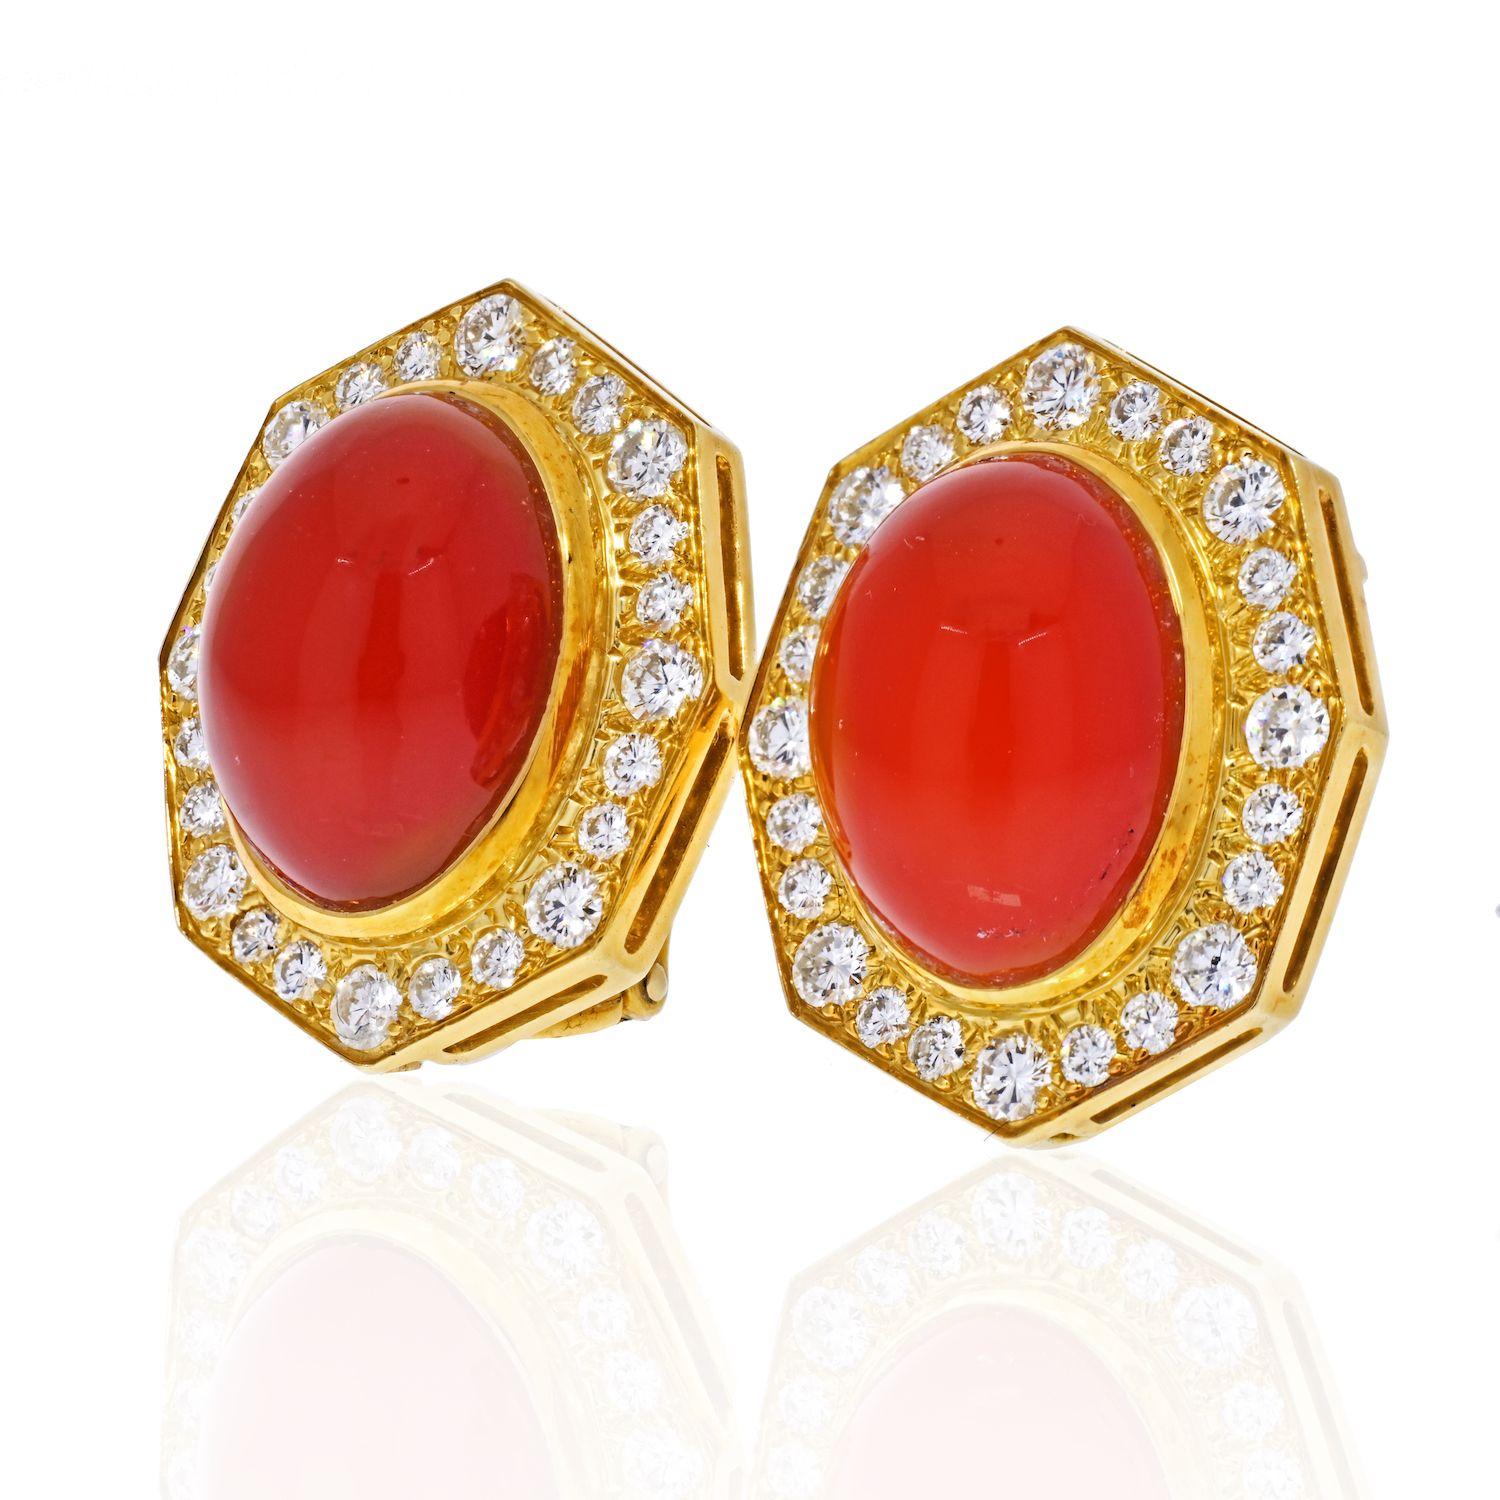 David Webb diamond and carnelian earrings. Containing two oval shape cabochon cut carnelian measuring approximately 14.75 x 10.80 x 7.20 mm and 48 round brilliant cut diamonds weighing approximately 1.60 carats total. Beautiful and subtle designer